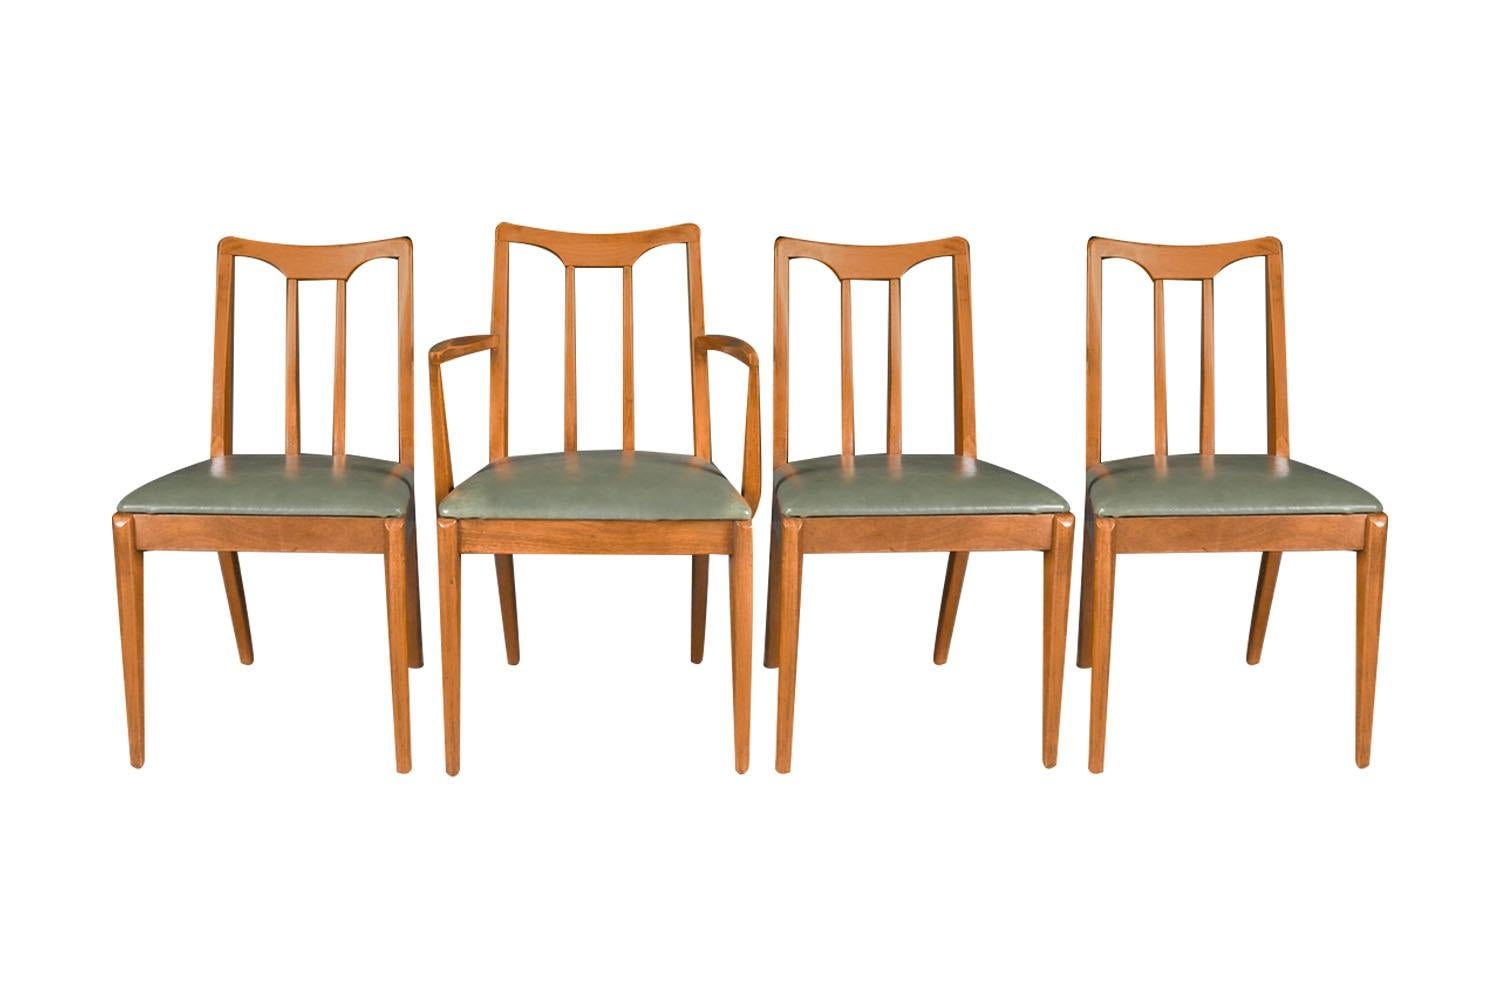 A set of four extremely sought after, gorgeous 1960s, modern walnut side/dining chairs designed by John Van Koert for the Drexel Projection line. Featuring a full matching set of four, one of which has arms, each remains in original condition